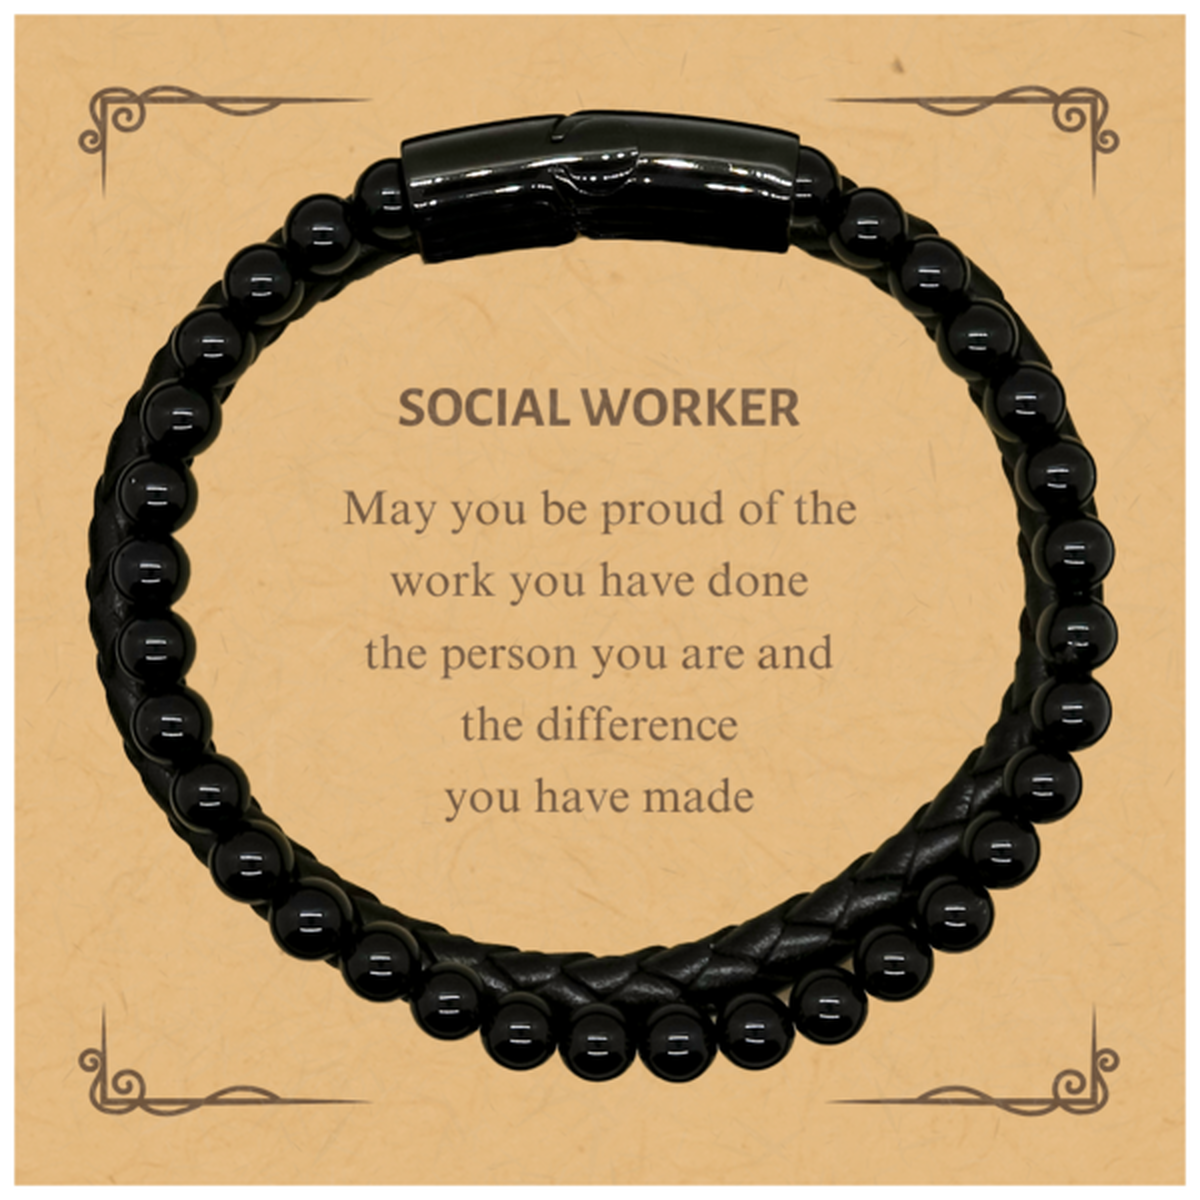 Social Worker May you be proud of the work you have done, Retirement Social Worker Stone Leather Bracelets for Colleague Appreciation Gifts Amazing for Social Worker